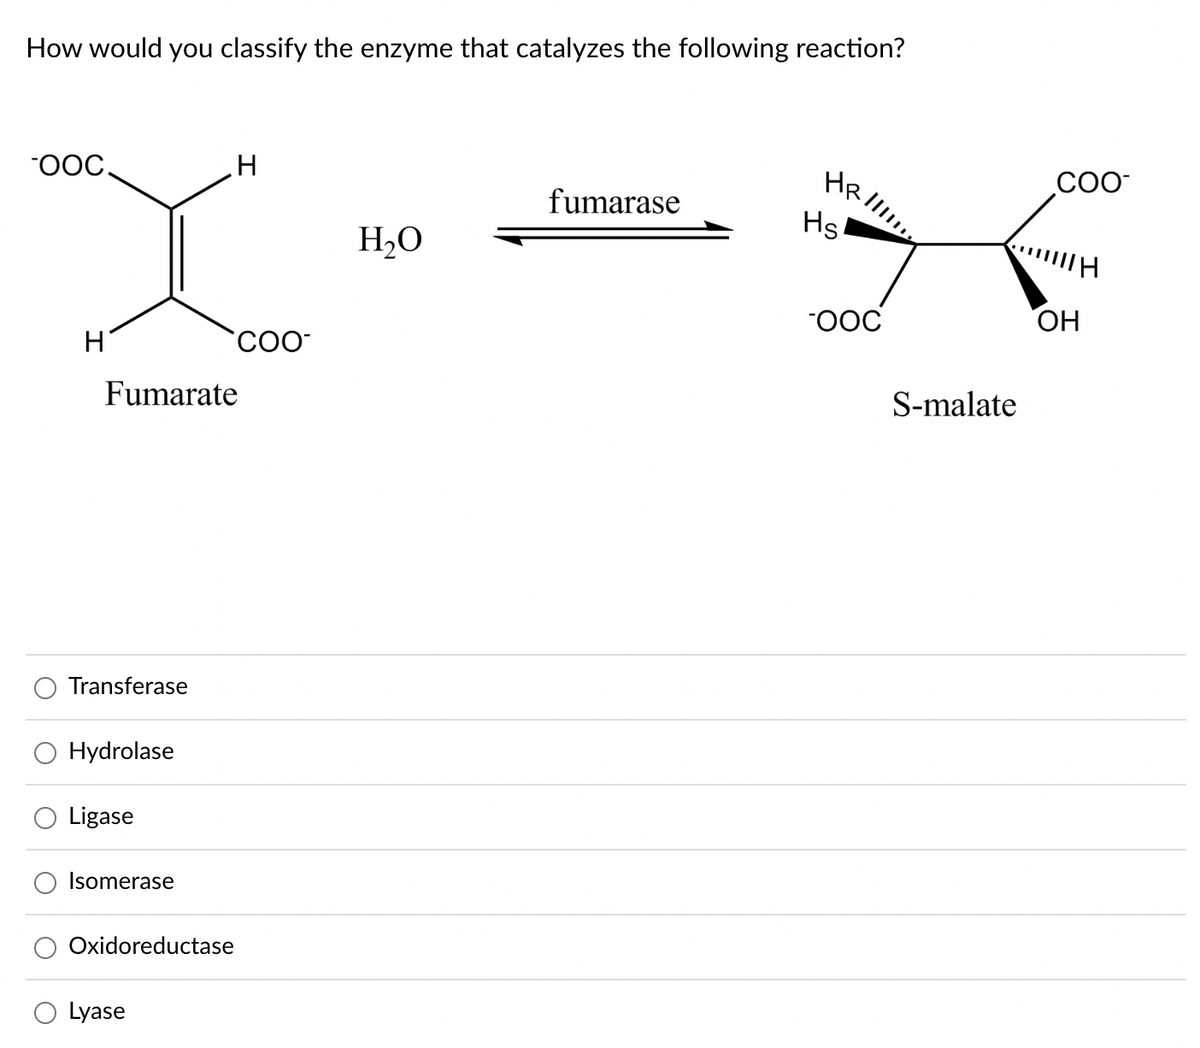 How would you classify the enzyme that catalyzes the following reaction?
-OOC.
H
Transferase
Fumarate
Hydrolase
Ligase
Isomerase
Oxidoreductase
H
Lyase
COO
H₂O
fumarase
HRII!!!!!
Hs
OOC
S-malate
COO-
OH